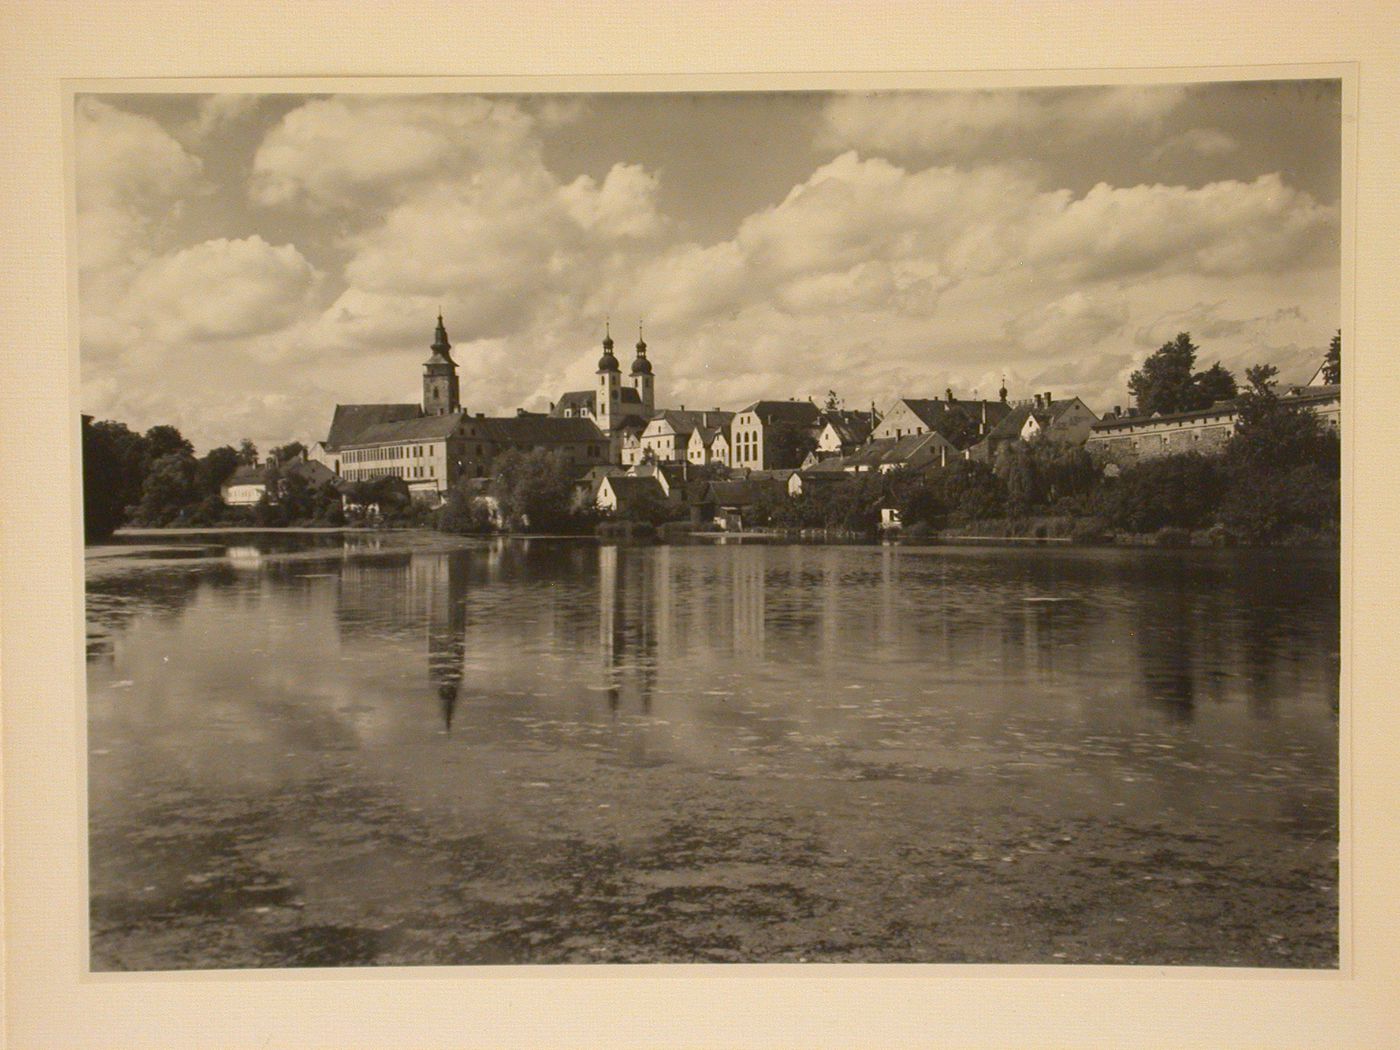 View across Ulický Pond towards Telc showing St. James Church and the Church of Jesus' Name, Czechoslovakia (now Czech Republic)